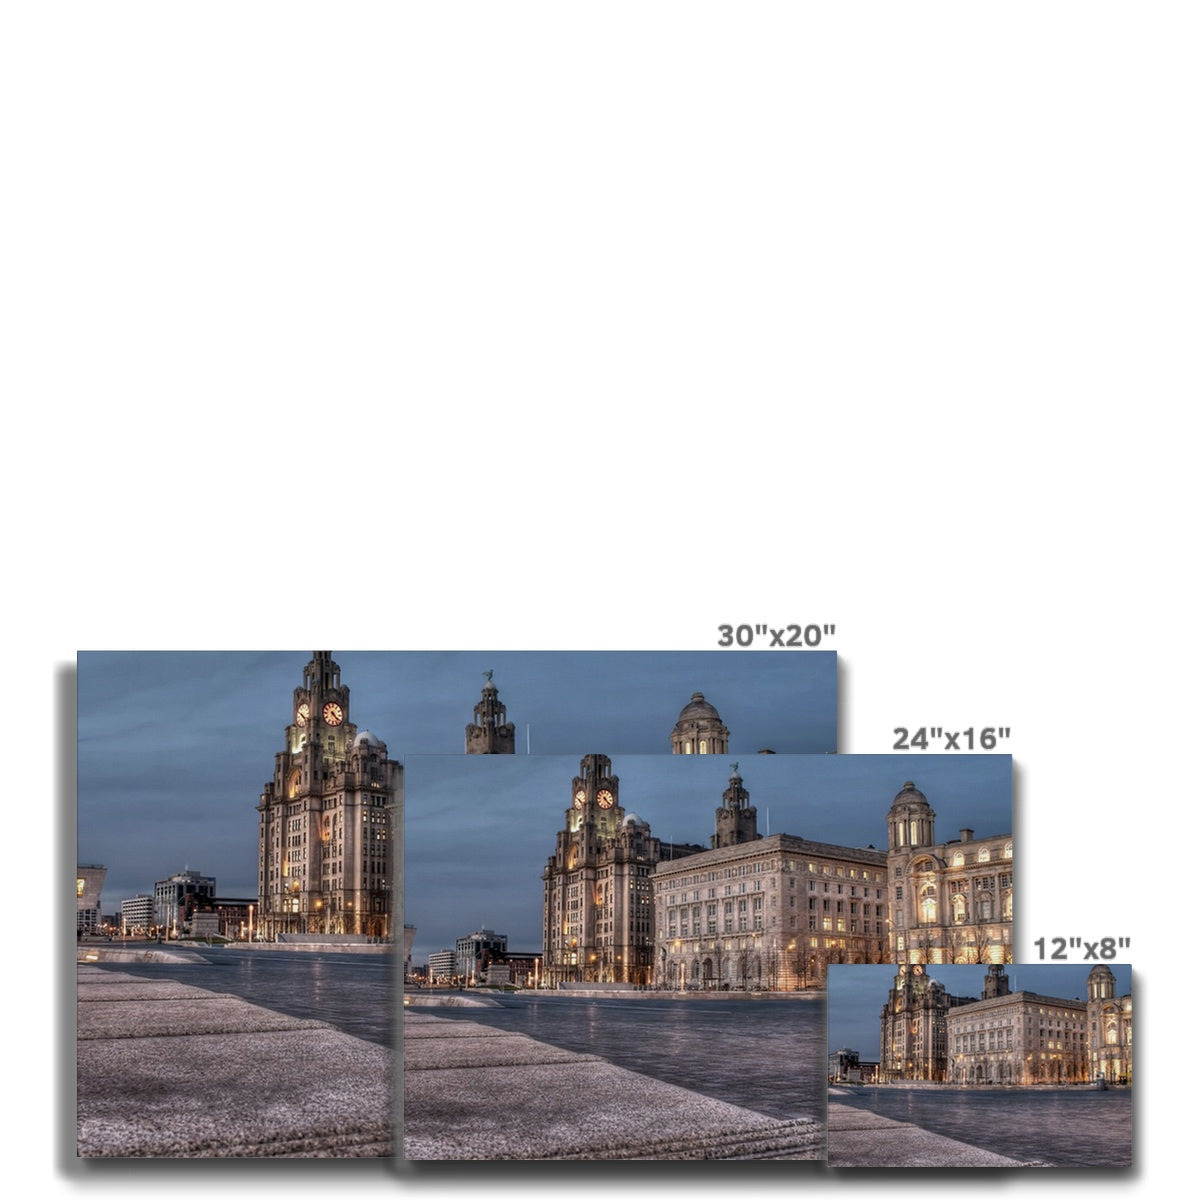 The Liver Buildings: A Liverpool Icon at Twilight Eco Canvas